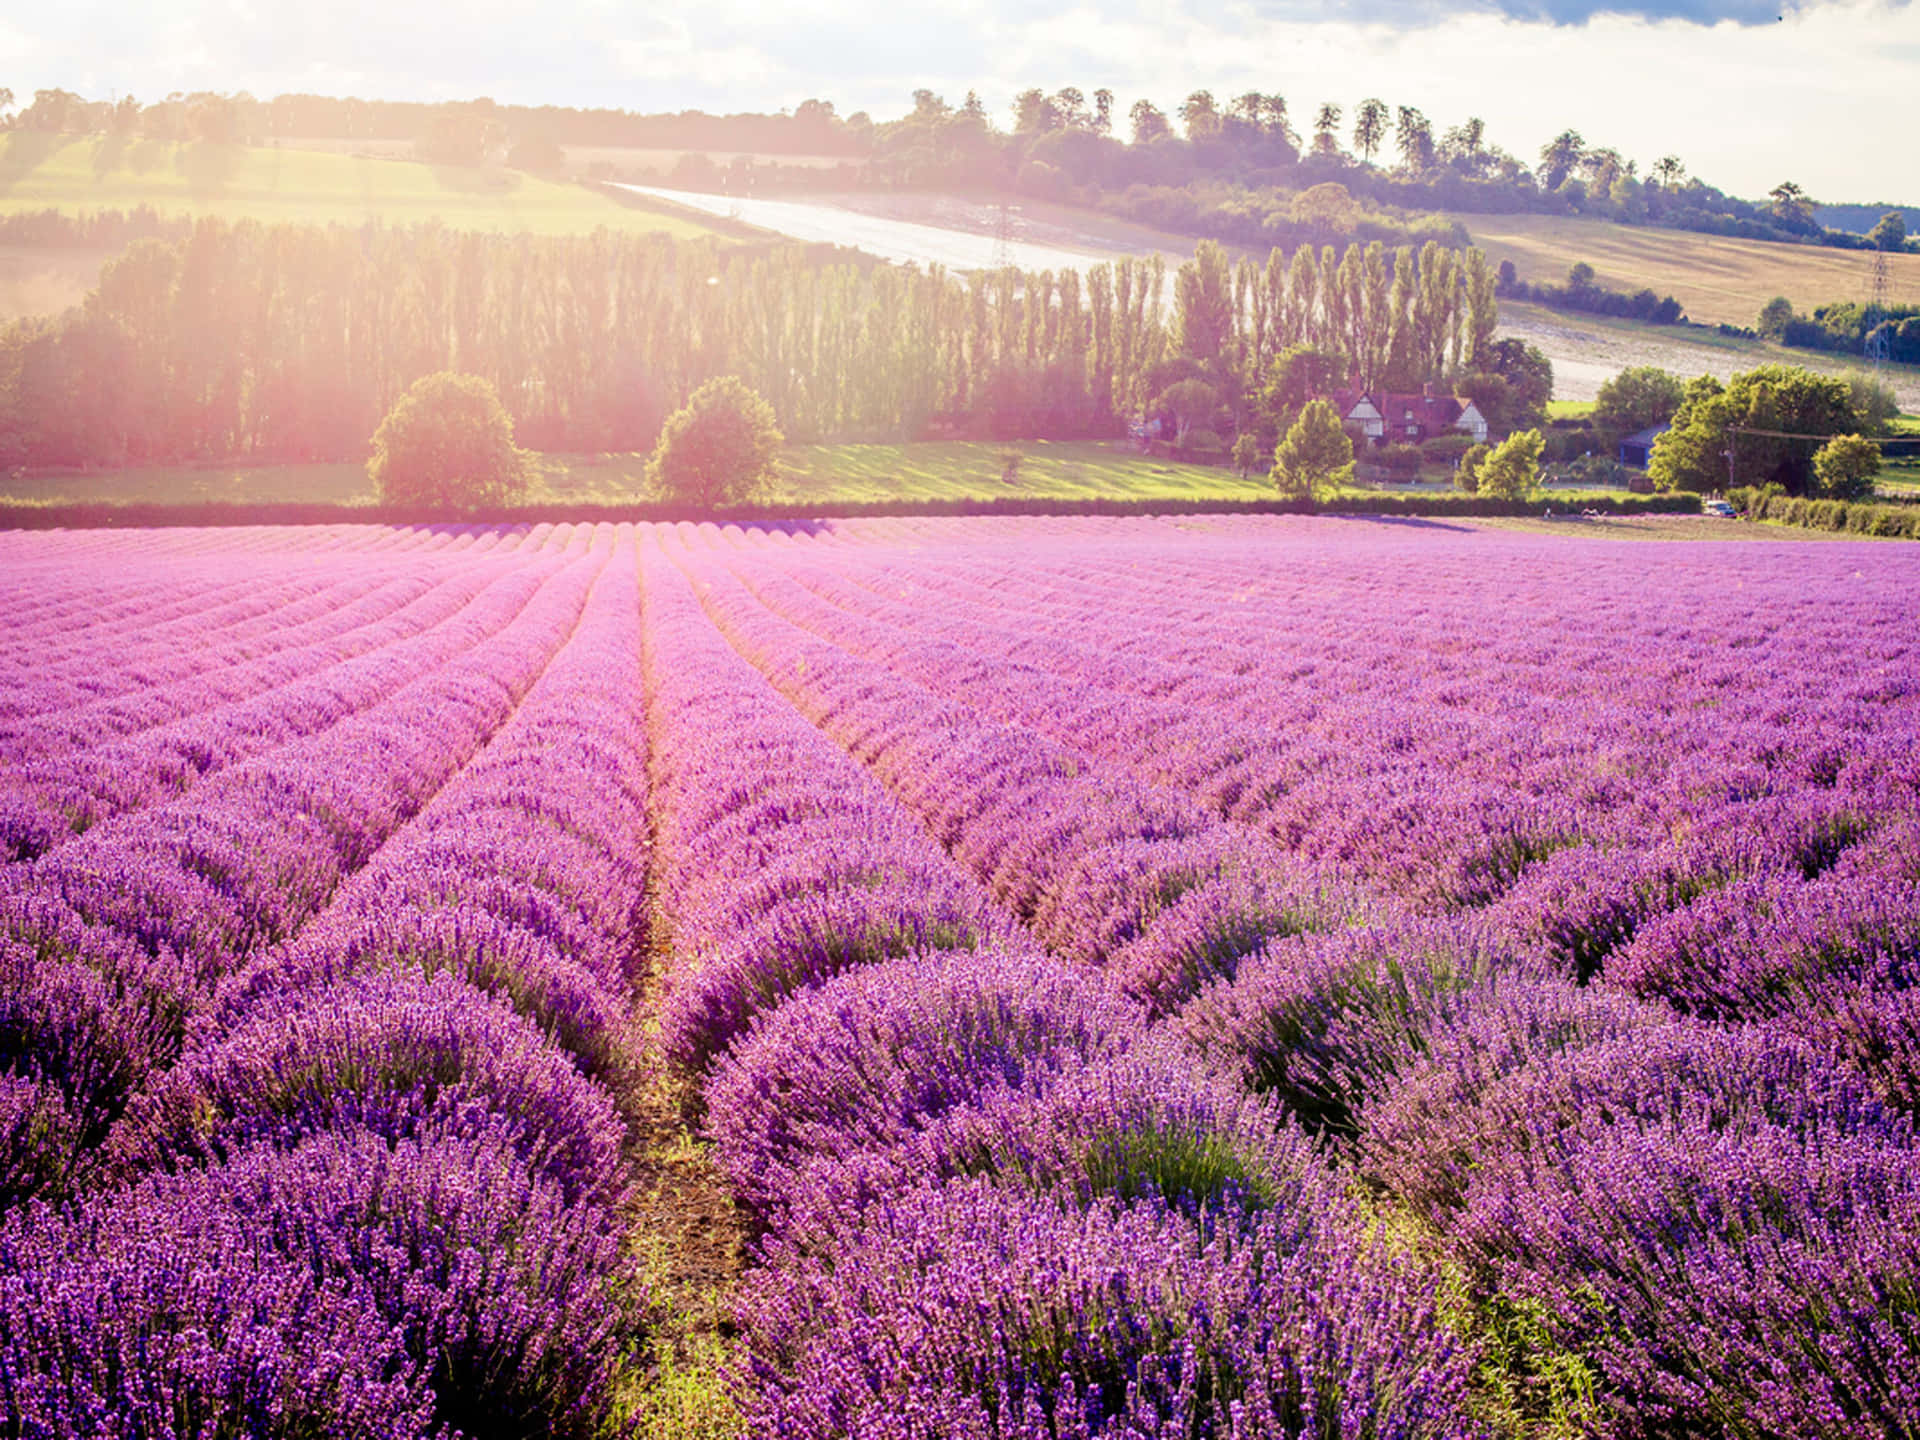 Enjoy the beautiful view of a lavender field